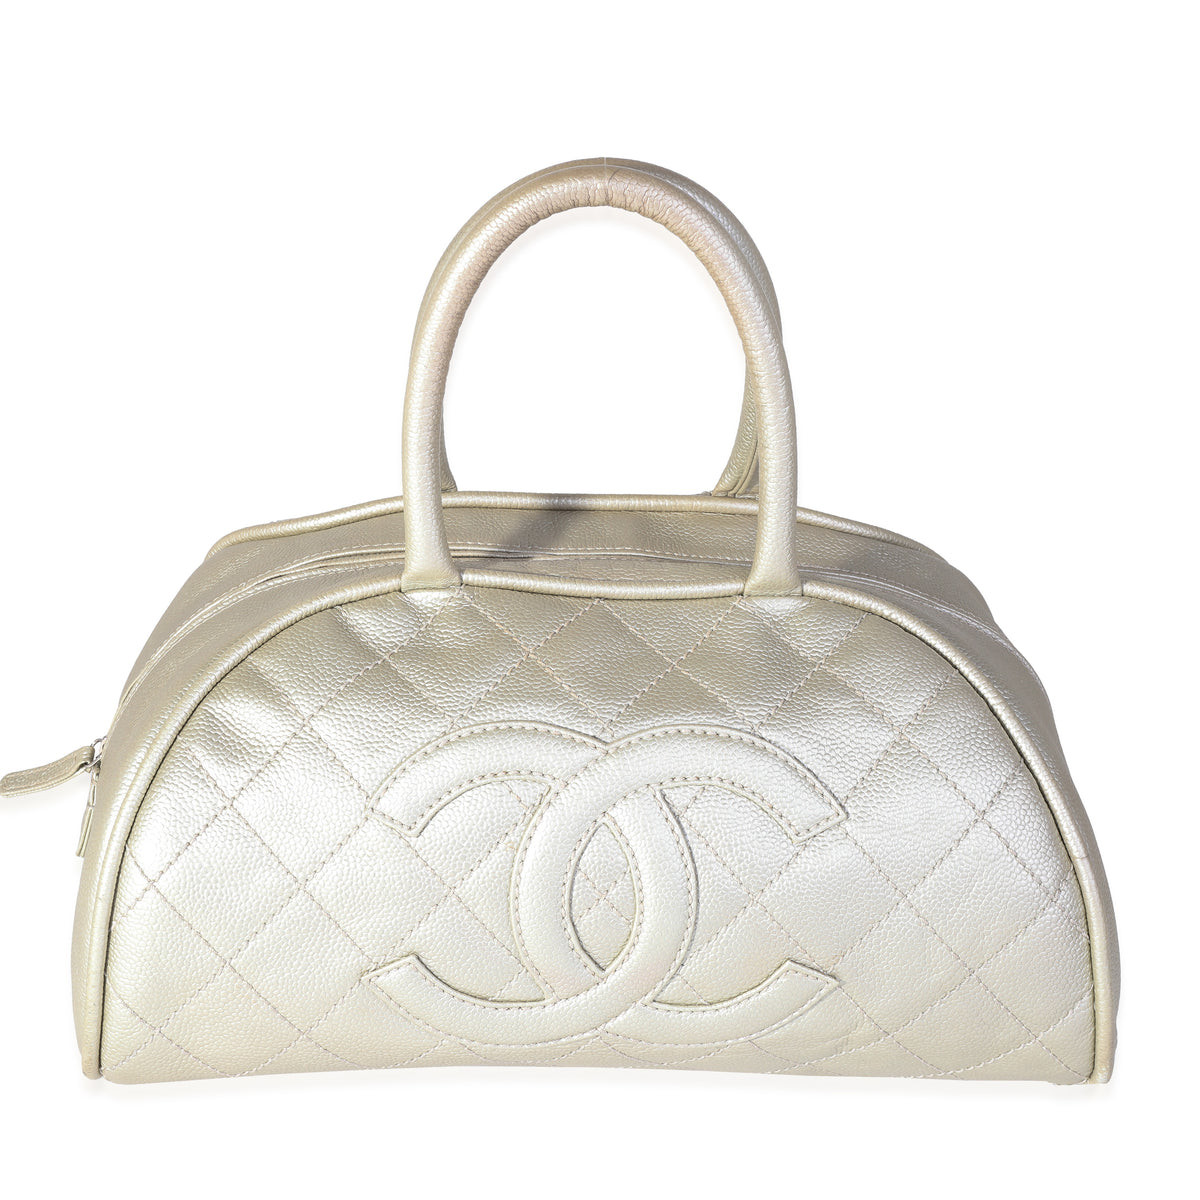 Chanel 2006/08 Soft Quilted Bowling Bag CC Zip Black Satchel